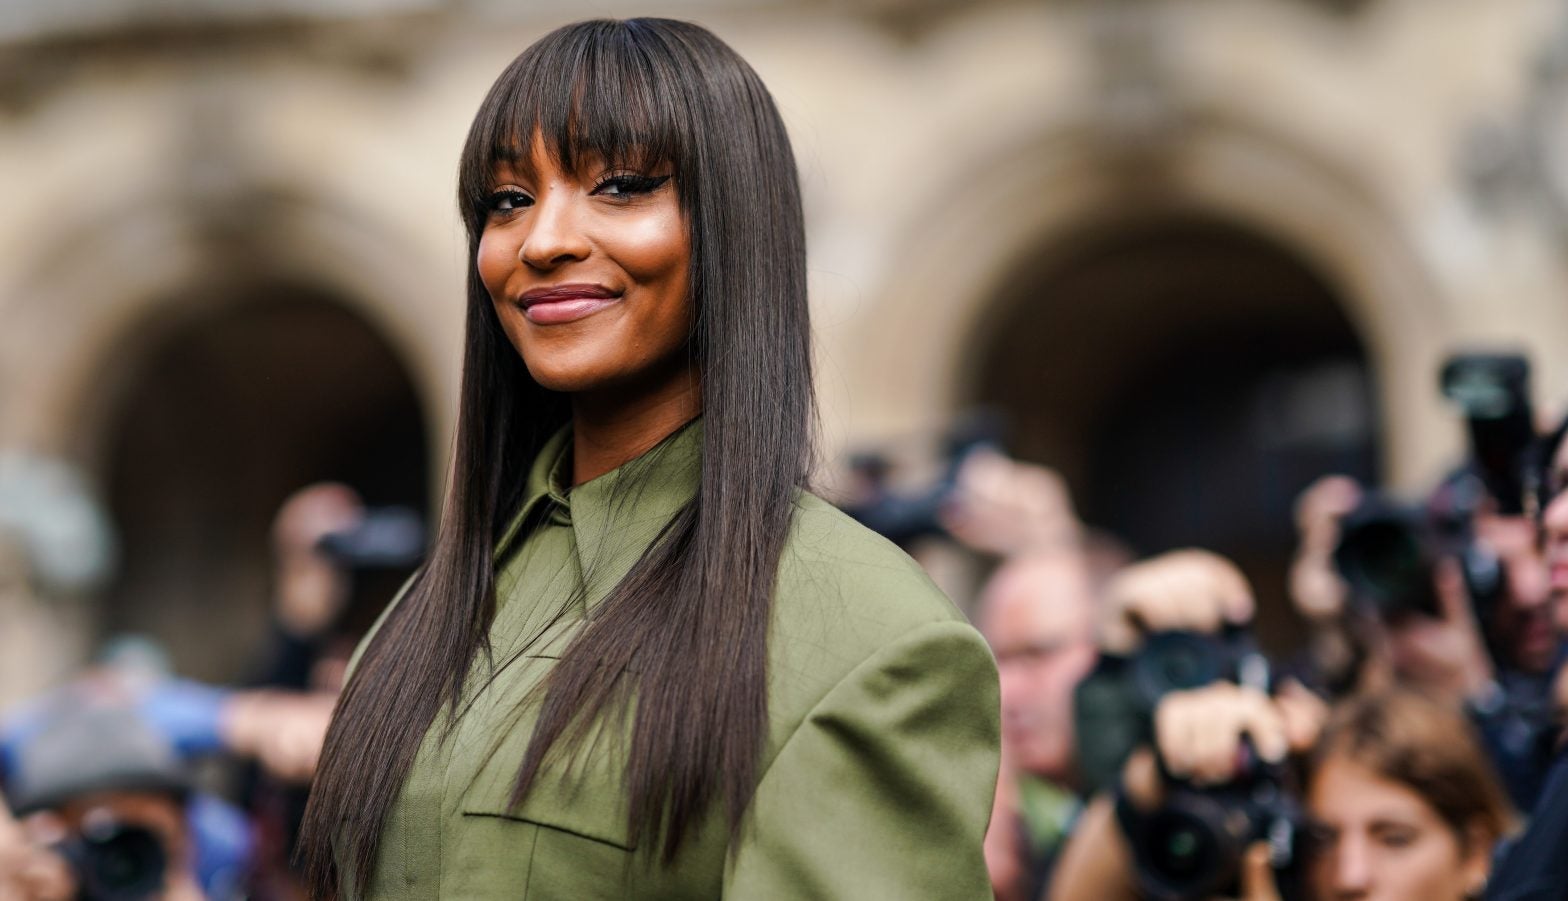 Wifey To Be! Model Jourdan Dunn Shows Off Her Dazzling Engagement Ring